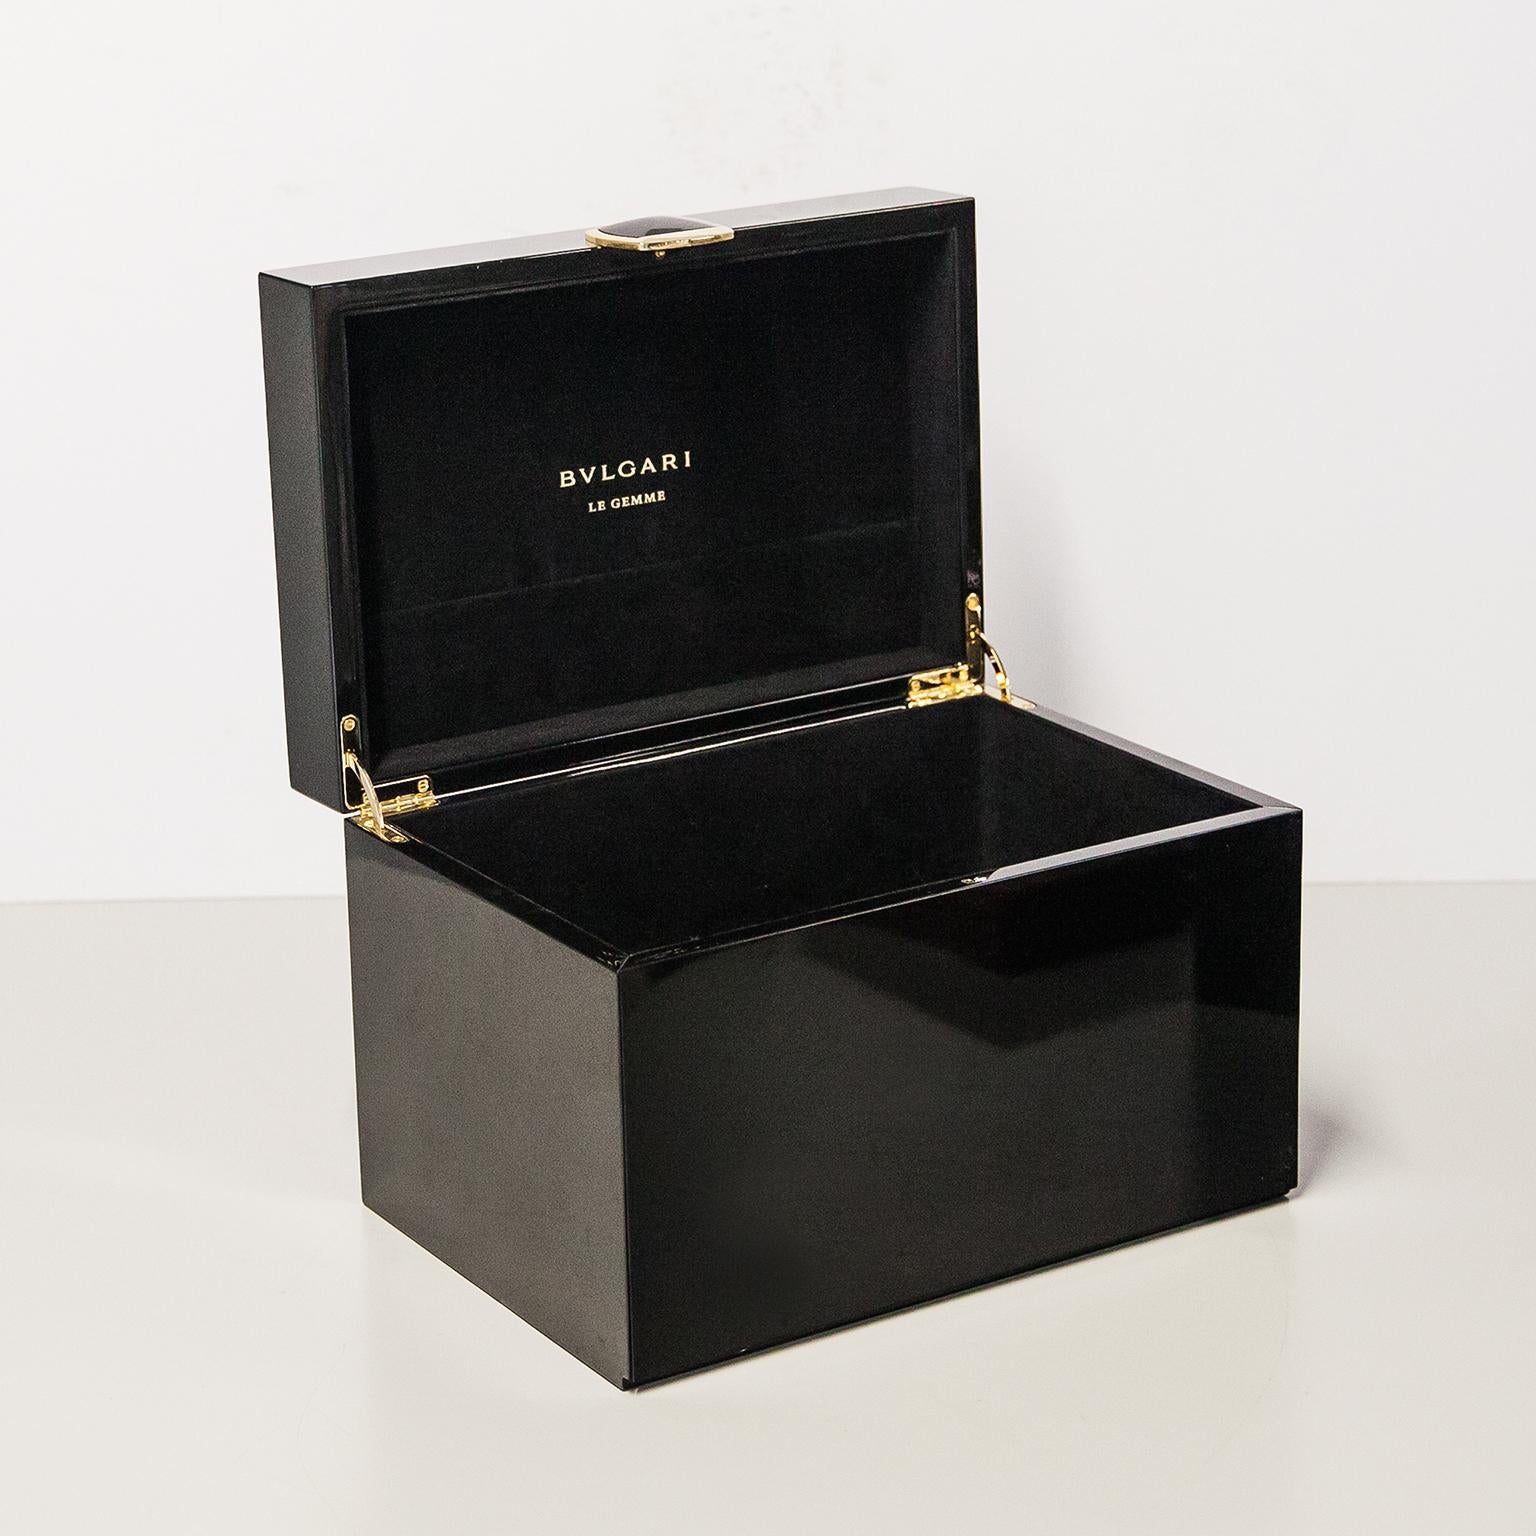 Huge Bvlgari China Lacquer Jewelry Le Gemme Box In Good Condition For Sale In Munich, DE